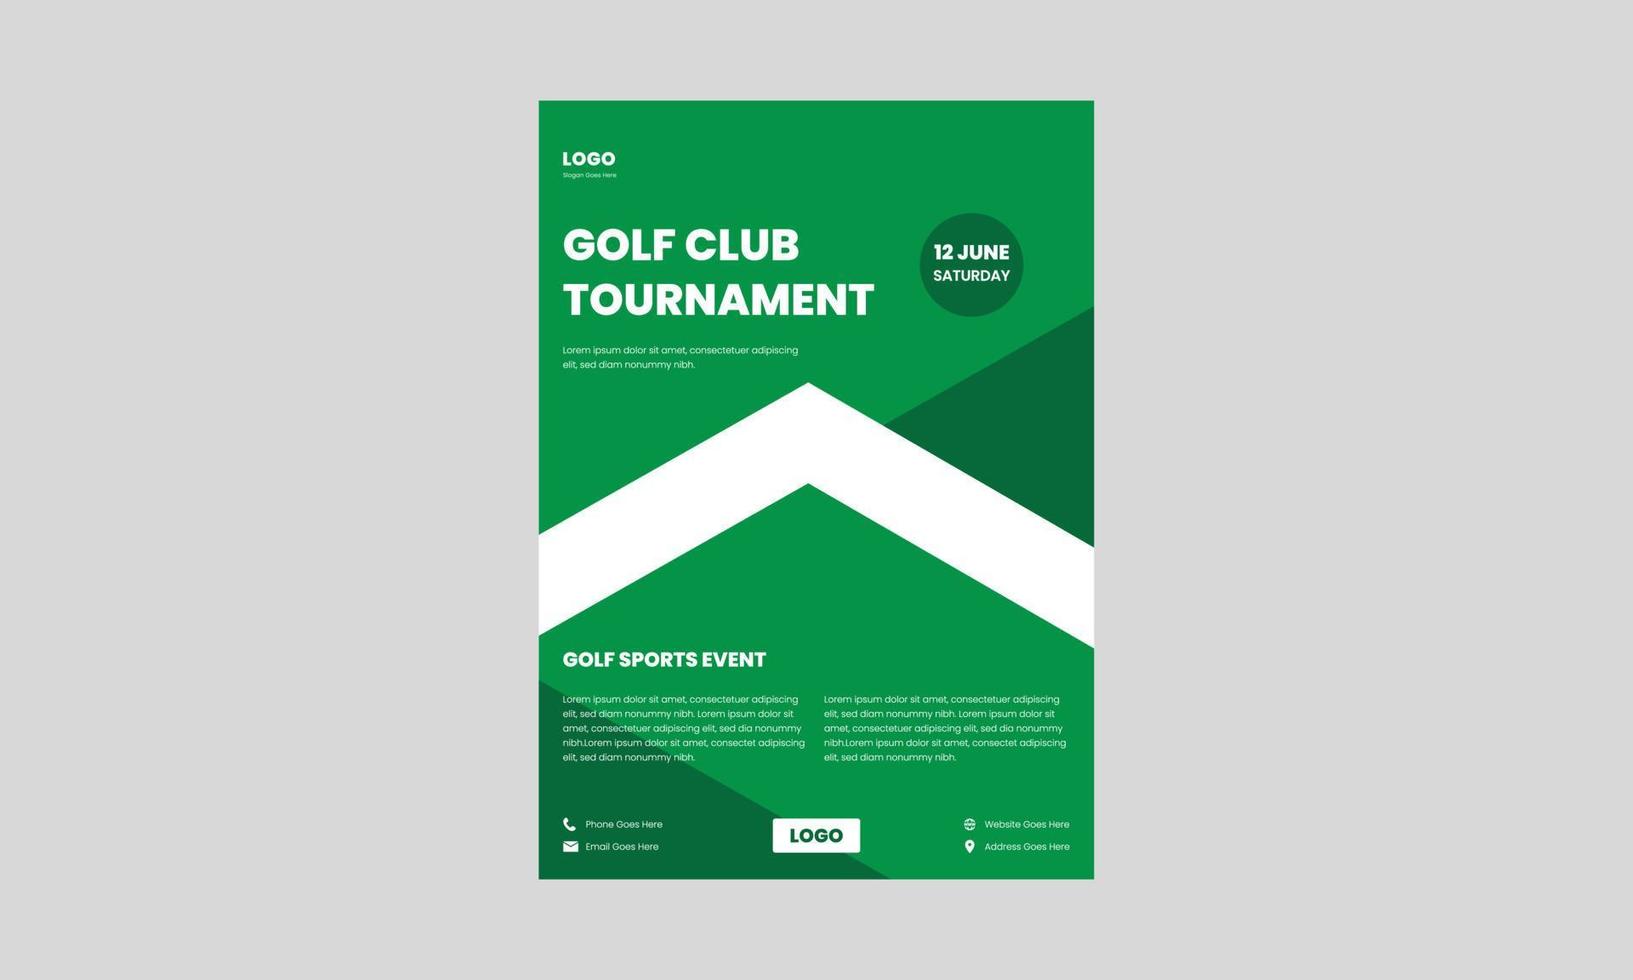 golf tournament flyer template. golf sports event flyer design in green color. vector